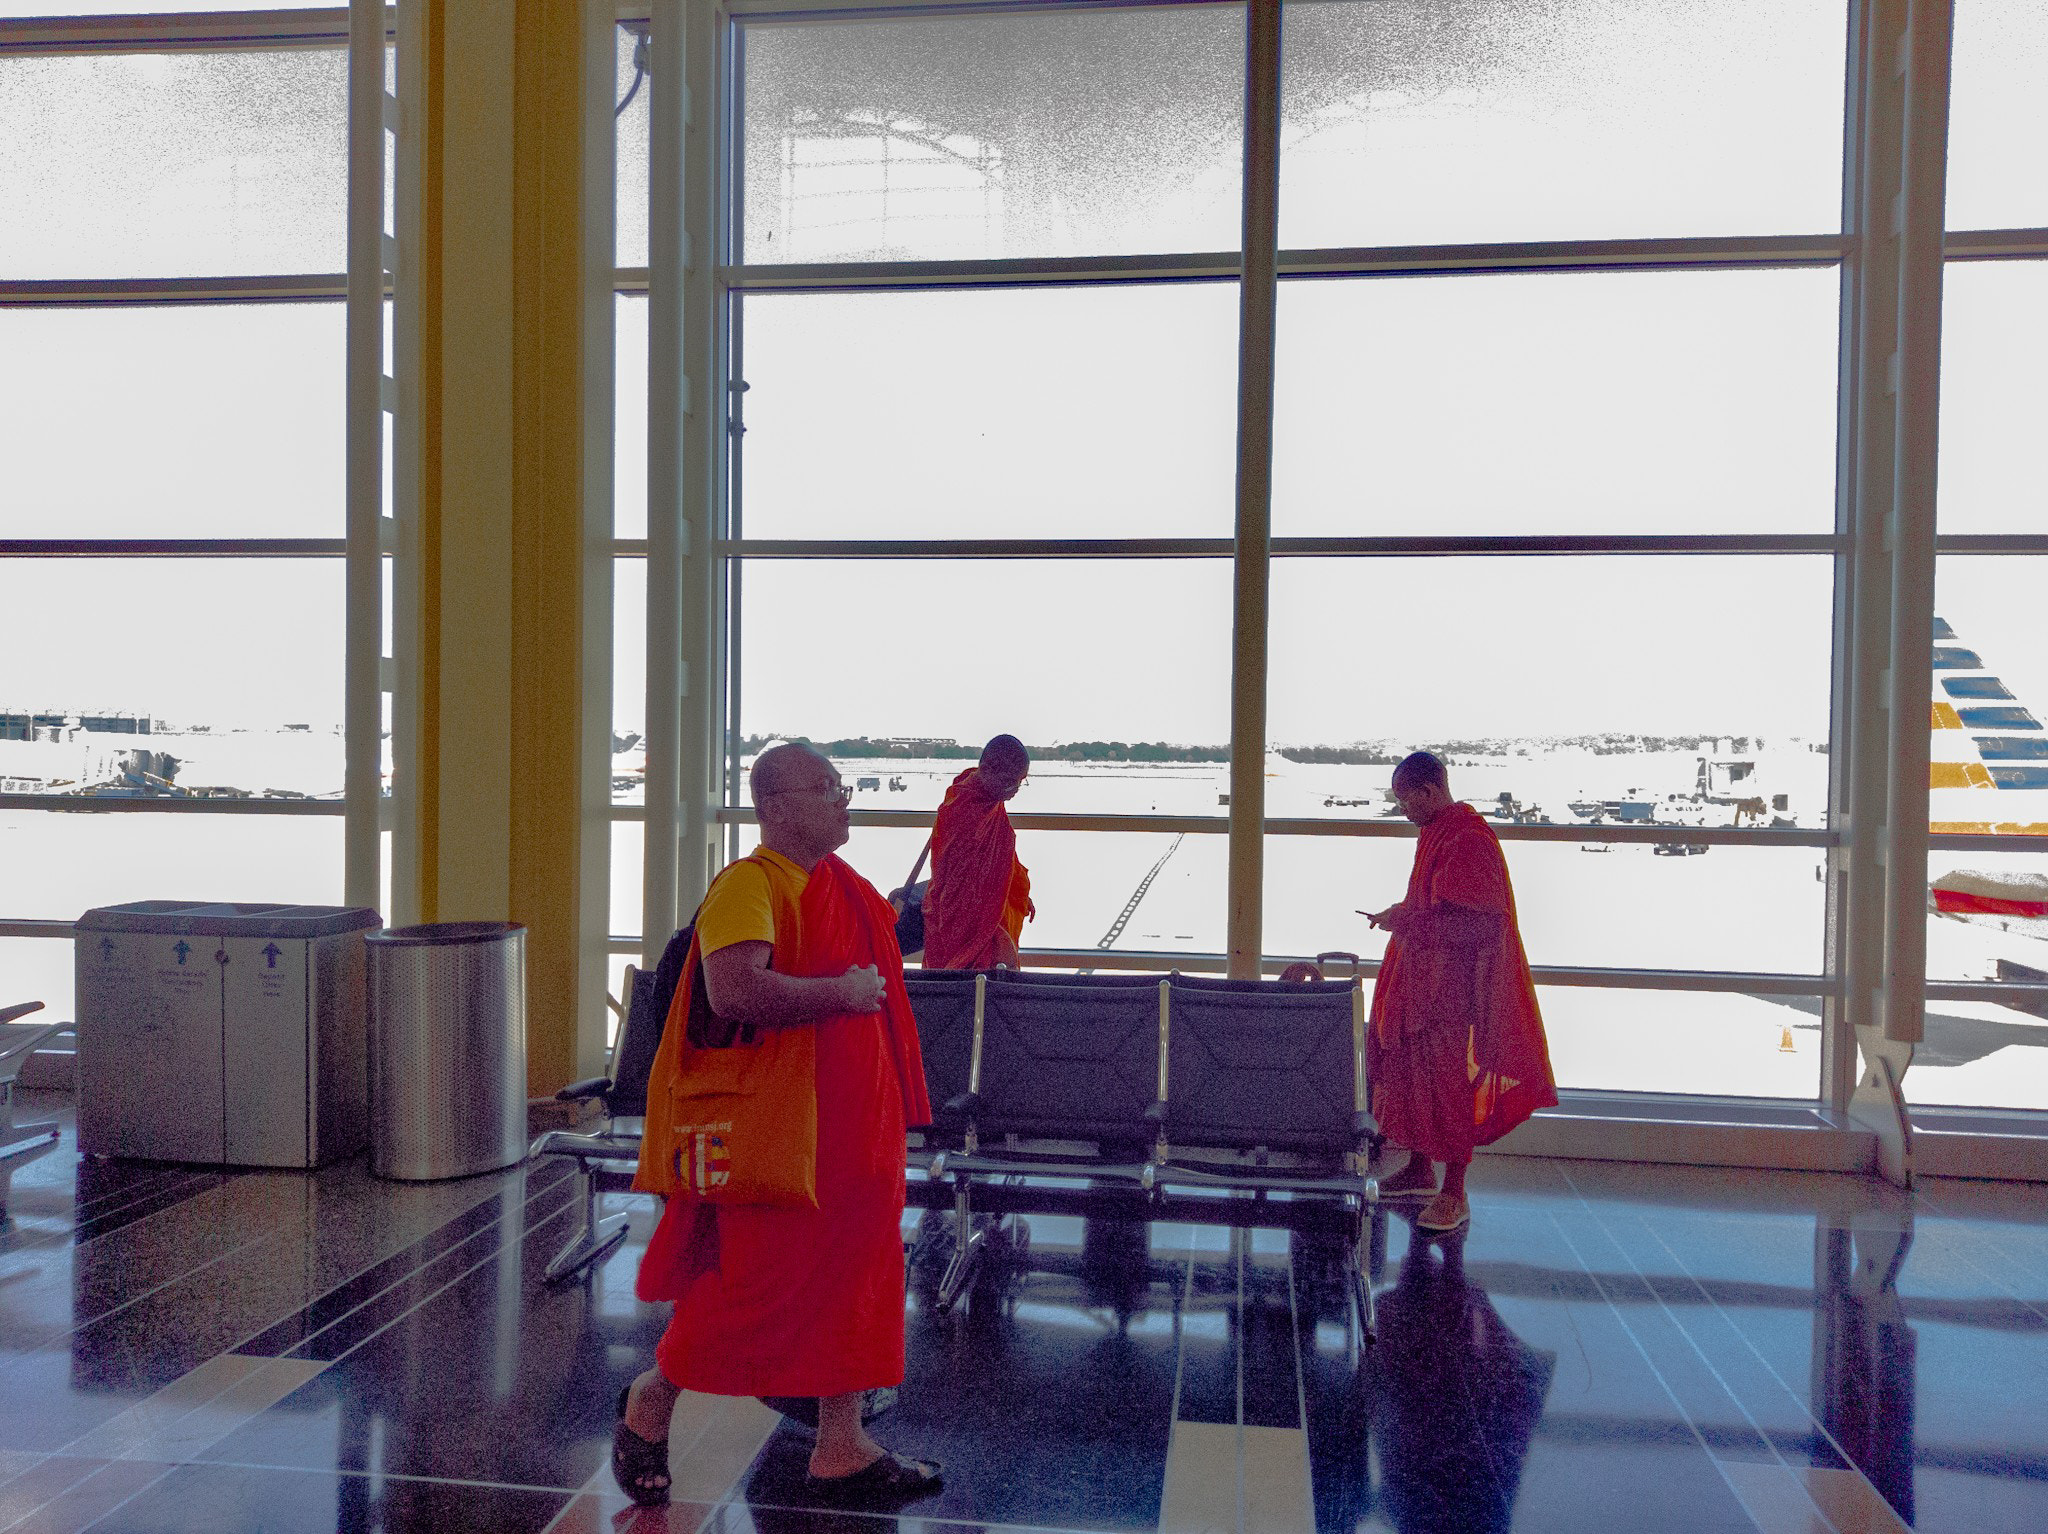 HTC 10 sample photo. The monks prepare for security photography